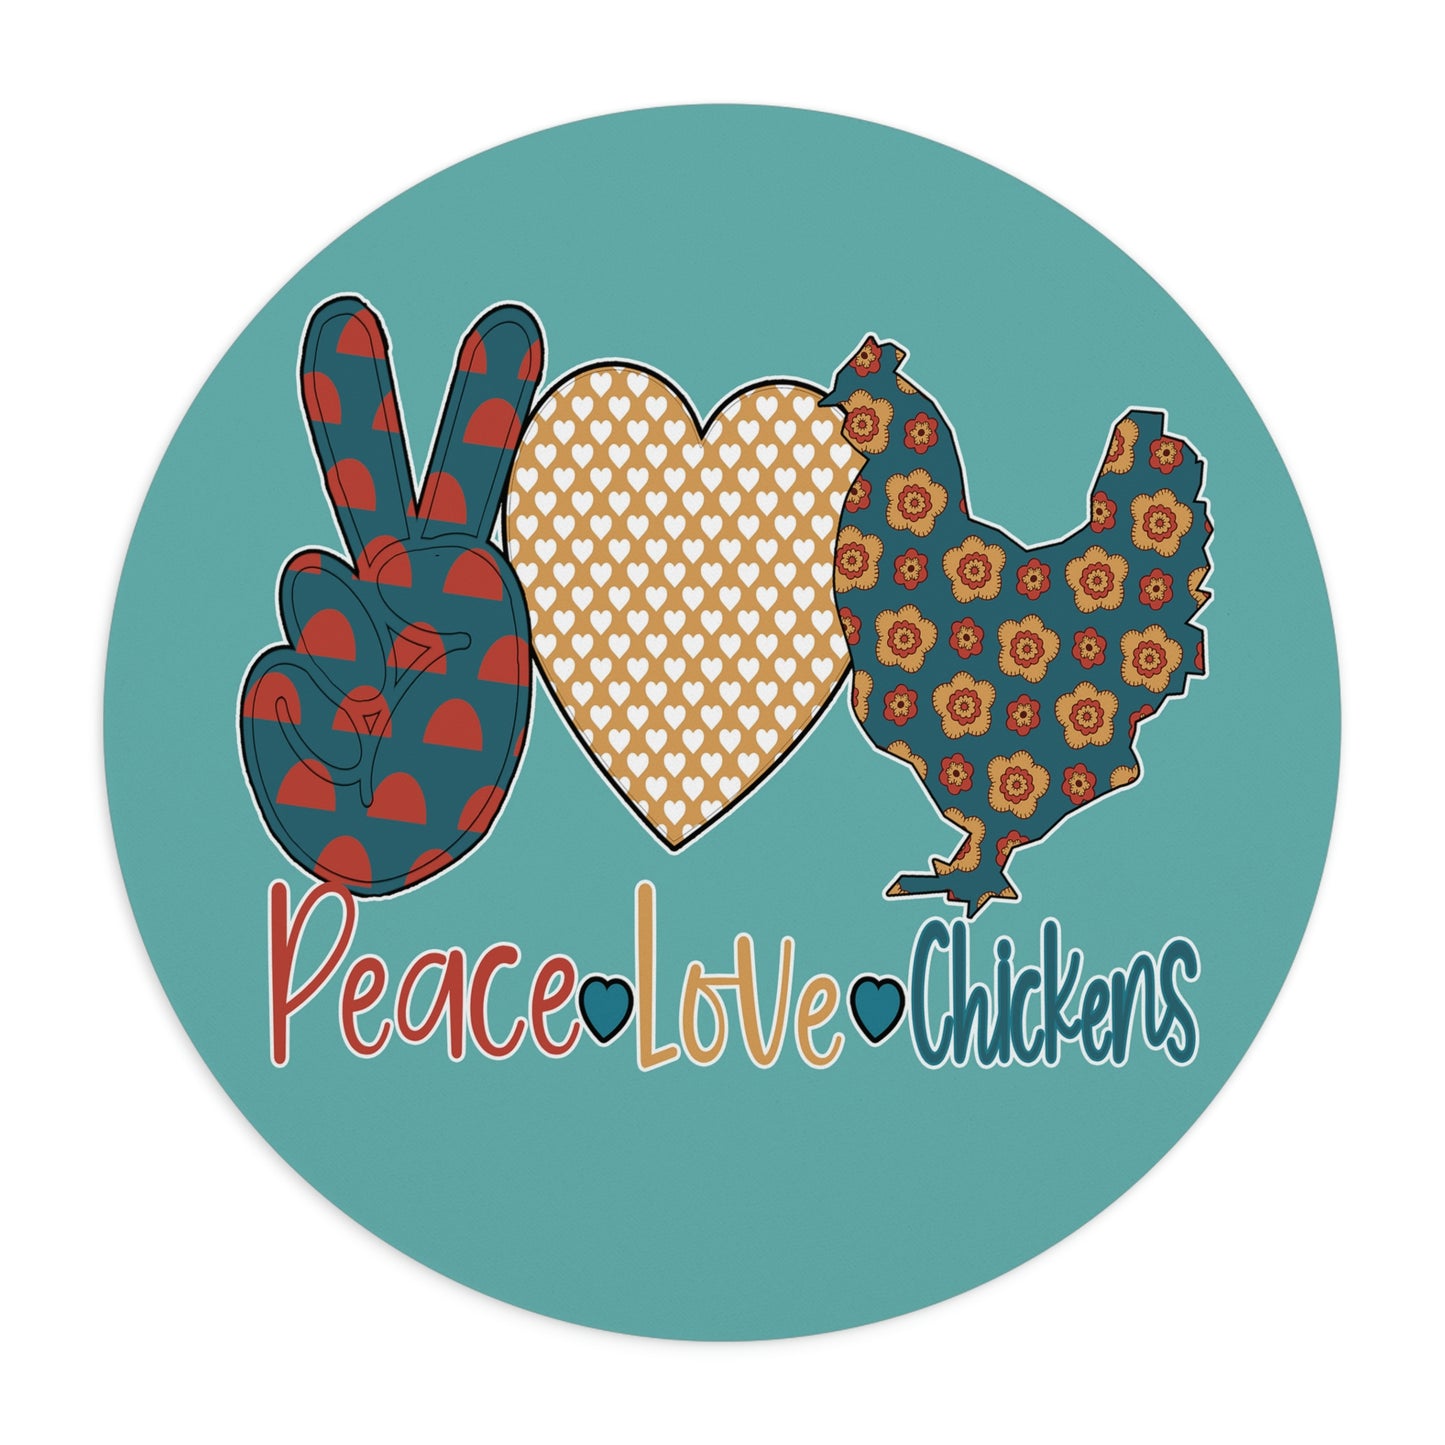 Peace Love Chickens Mouse Pad | Livestock Show Chickens | Show Poultry | PC Mousepad | Round Shape | Non-slip Rubber Bottom